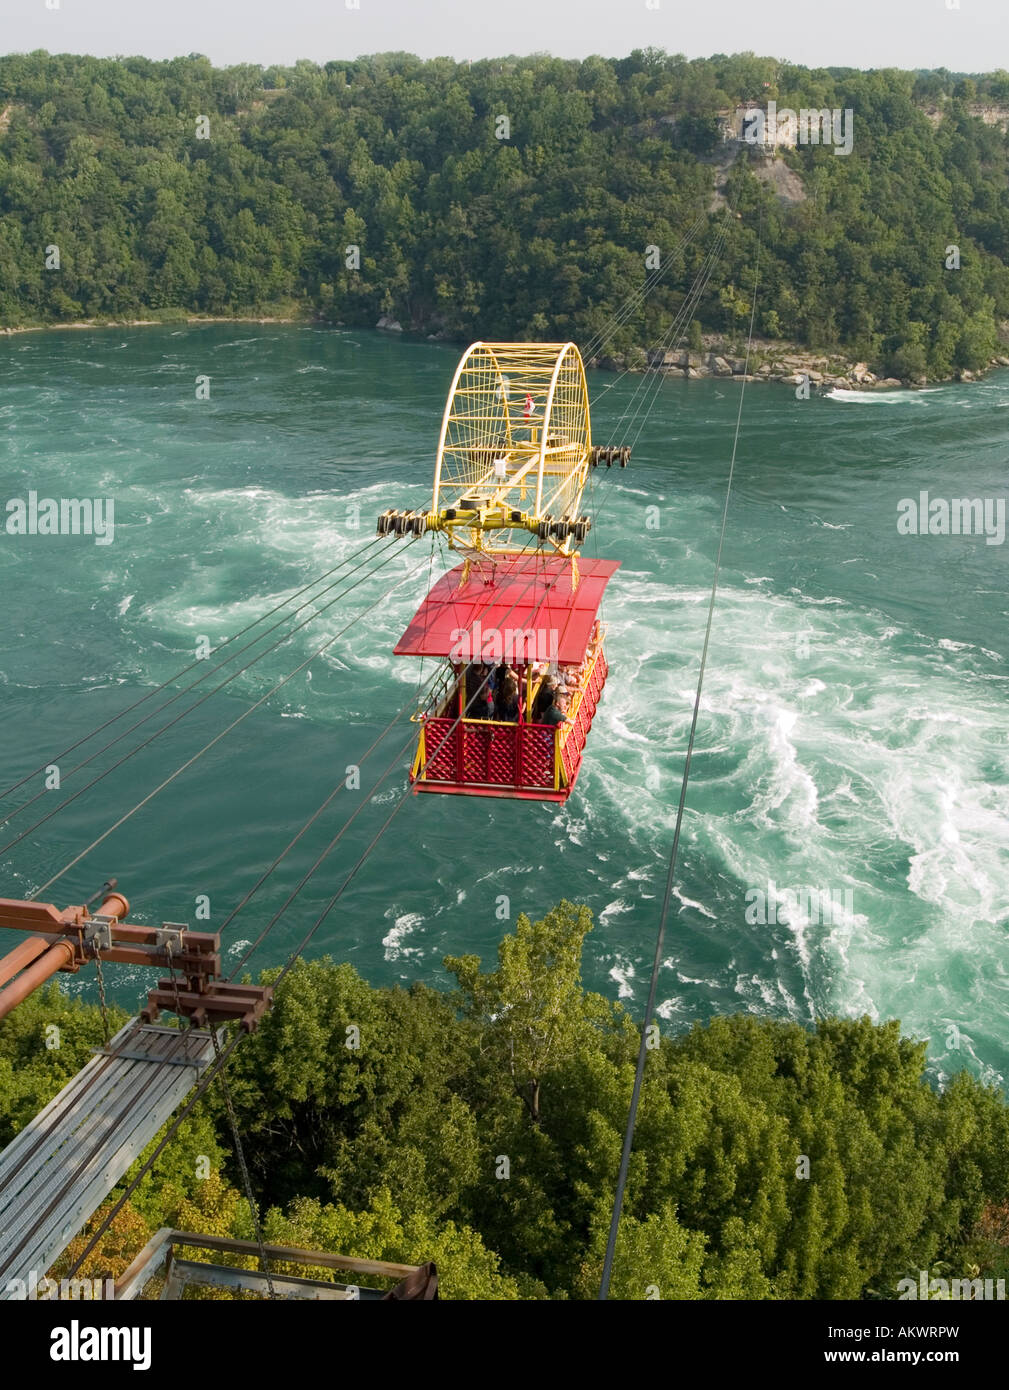 The Whirlpool Aero Car, an antique cable car suspended over the Whirpool Rapids Gorge in Niagara Falls, Ontario Canada Stock Photo